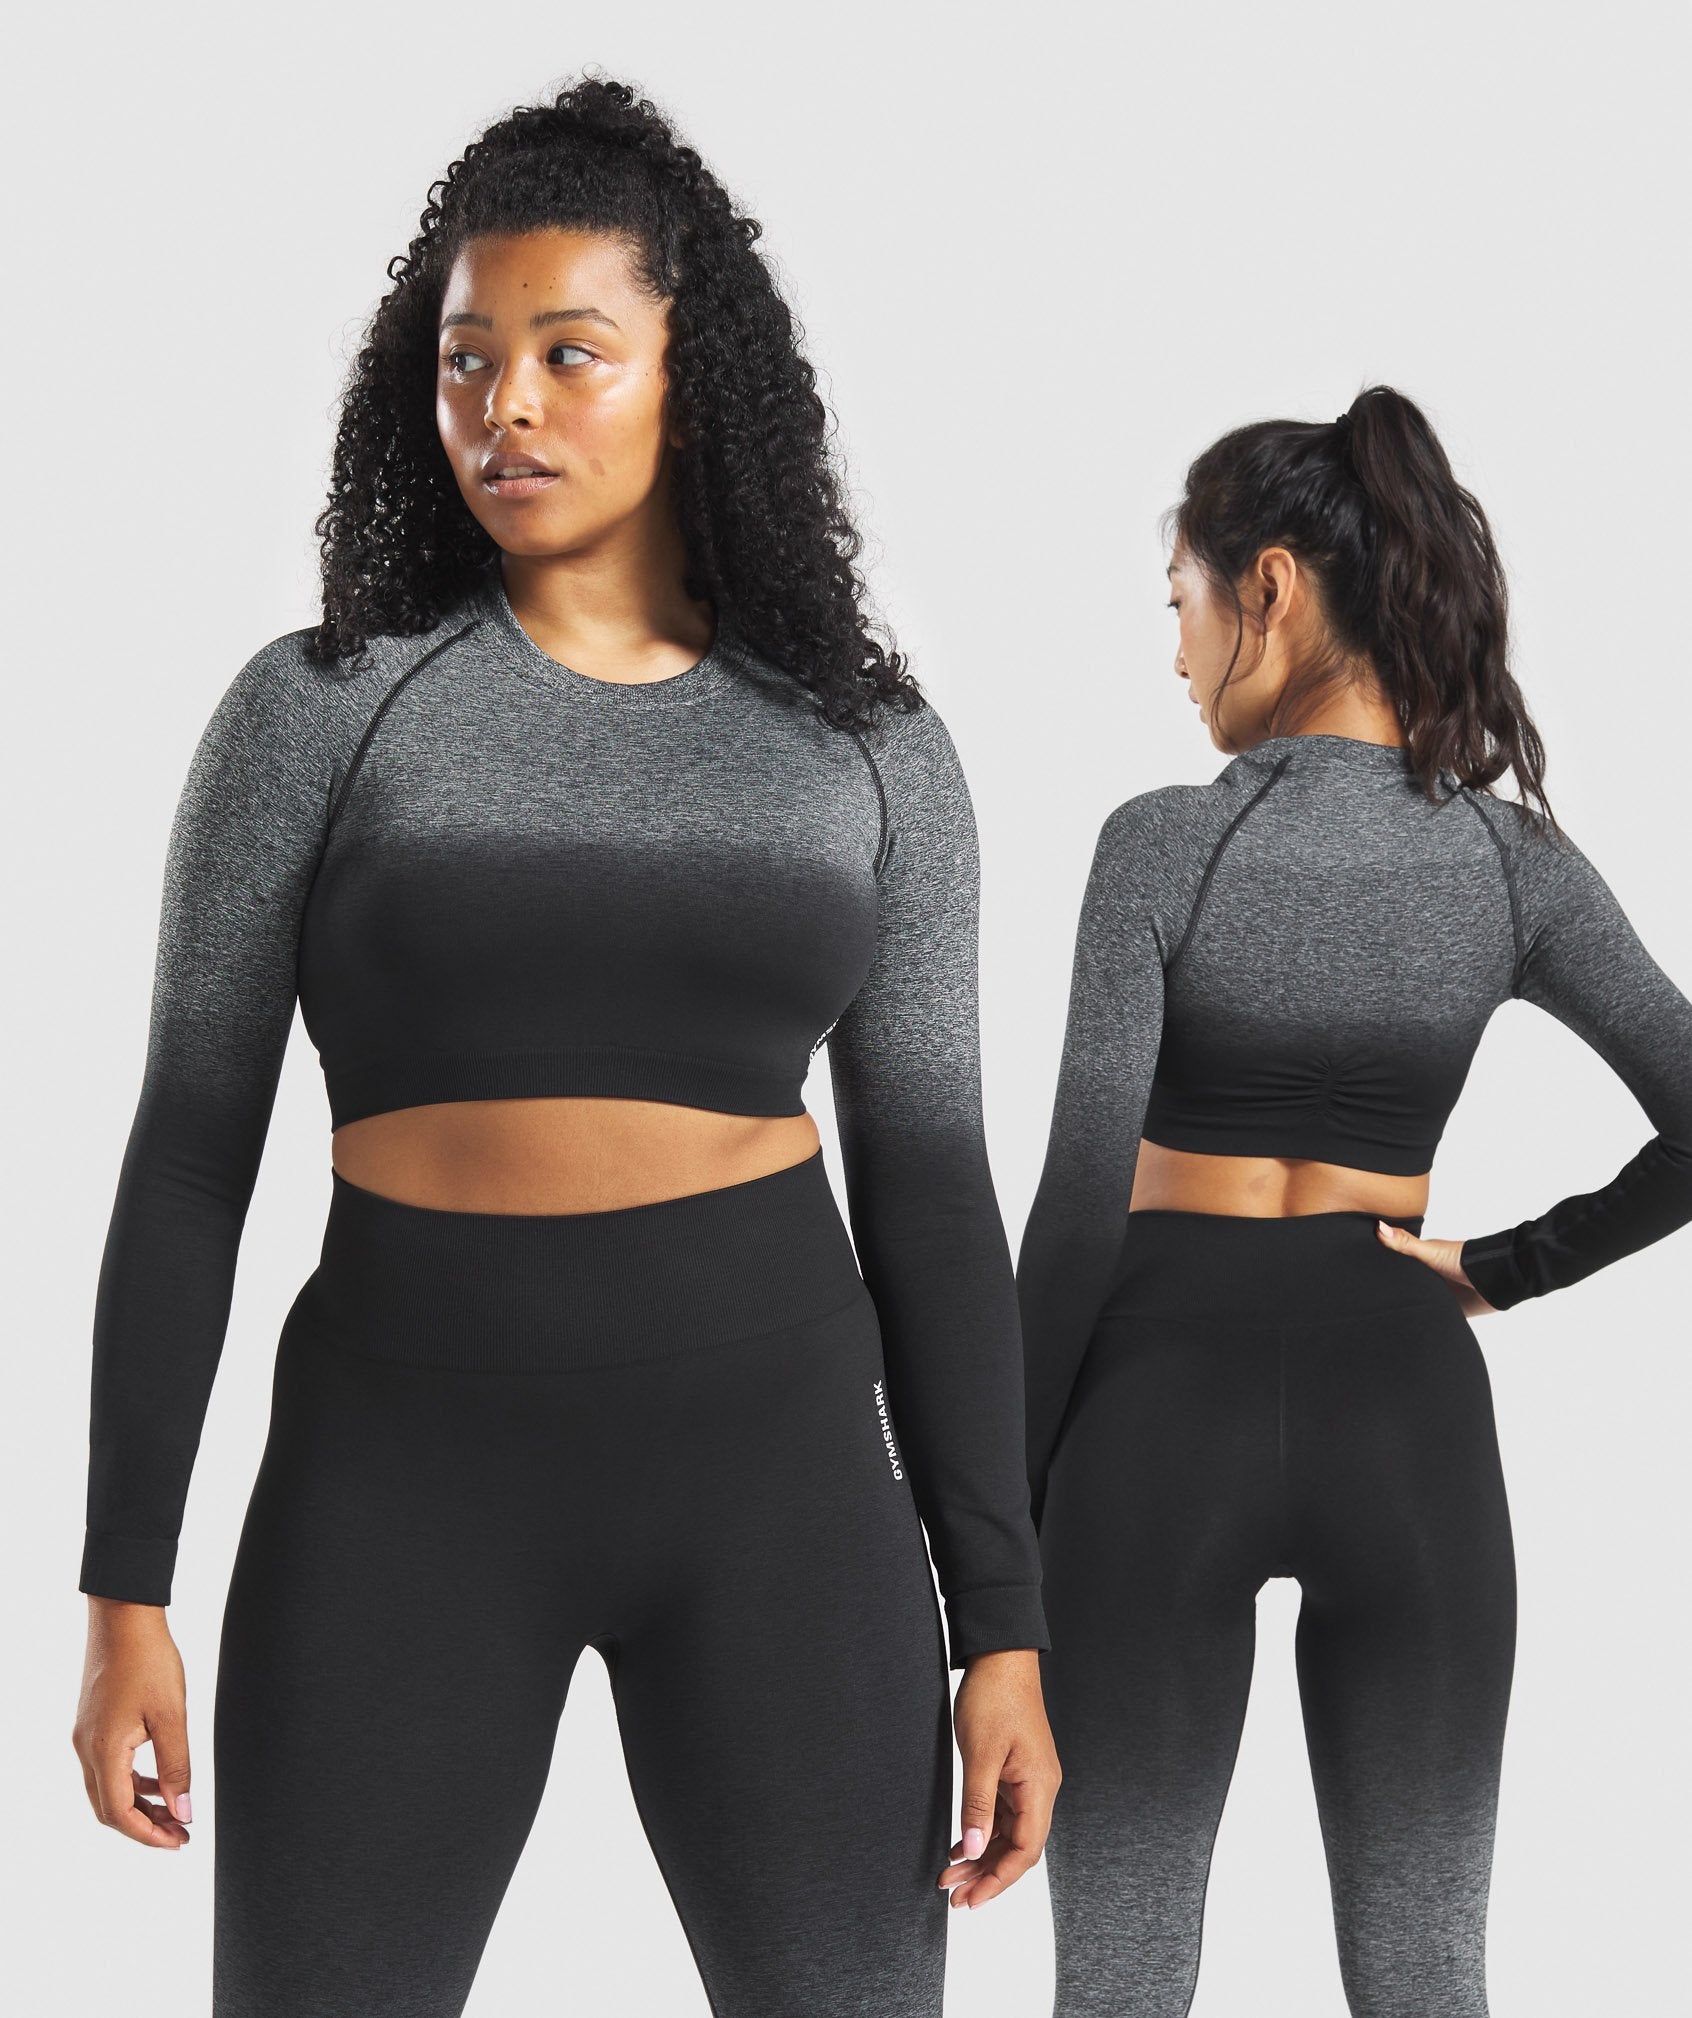 GYMSHARK Womens Seamless Ombre Legging and Crop Top Set Workout Black Size L